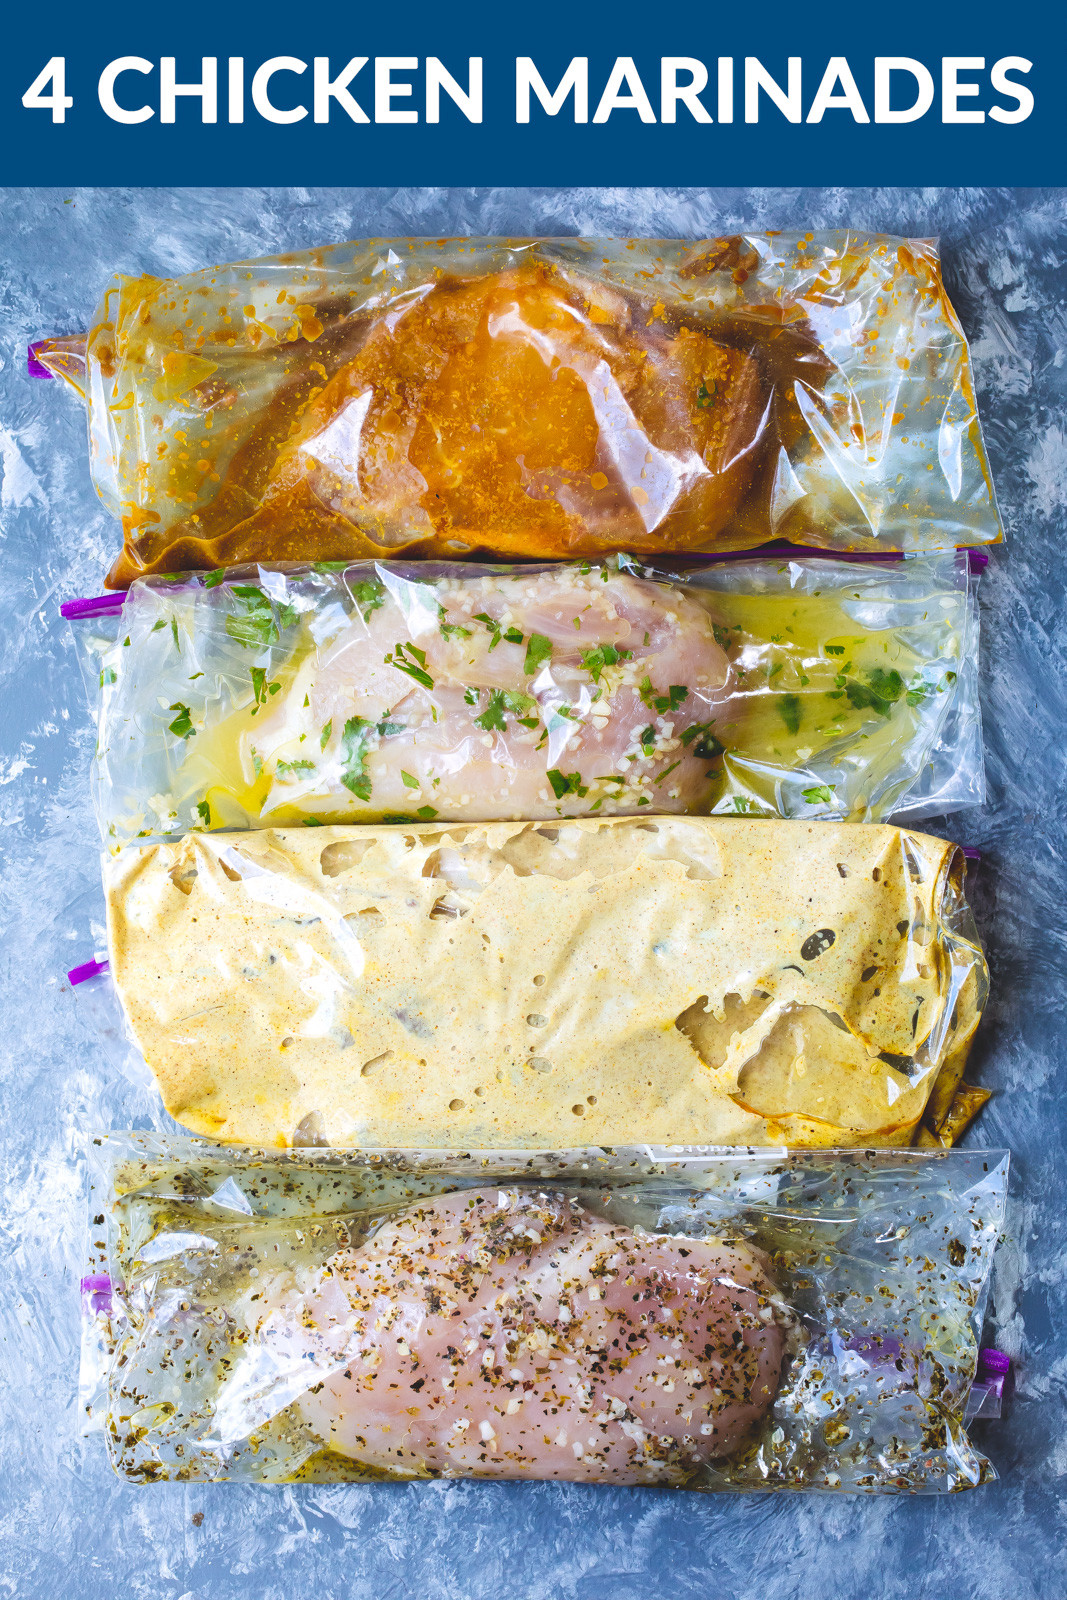 Healthy Marinades For Chicken
 4 Easy Chicken Marinades Living Lean & Clean with Just